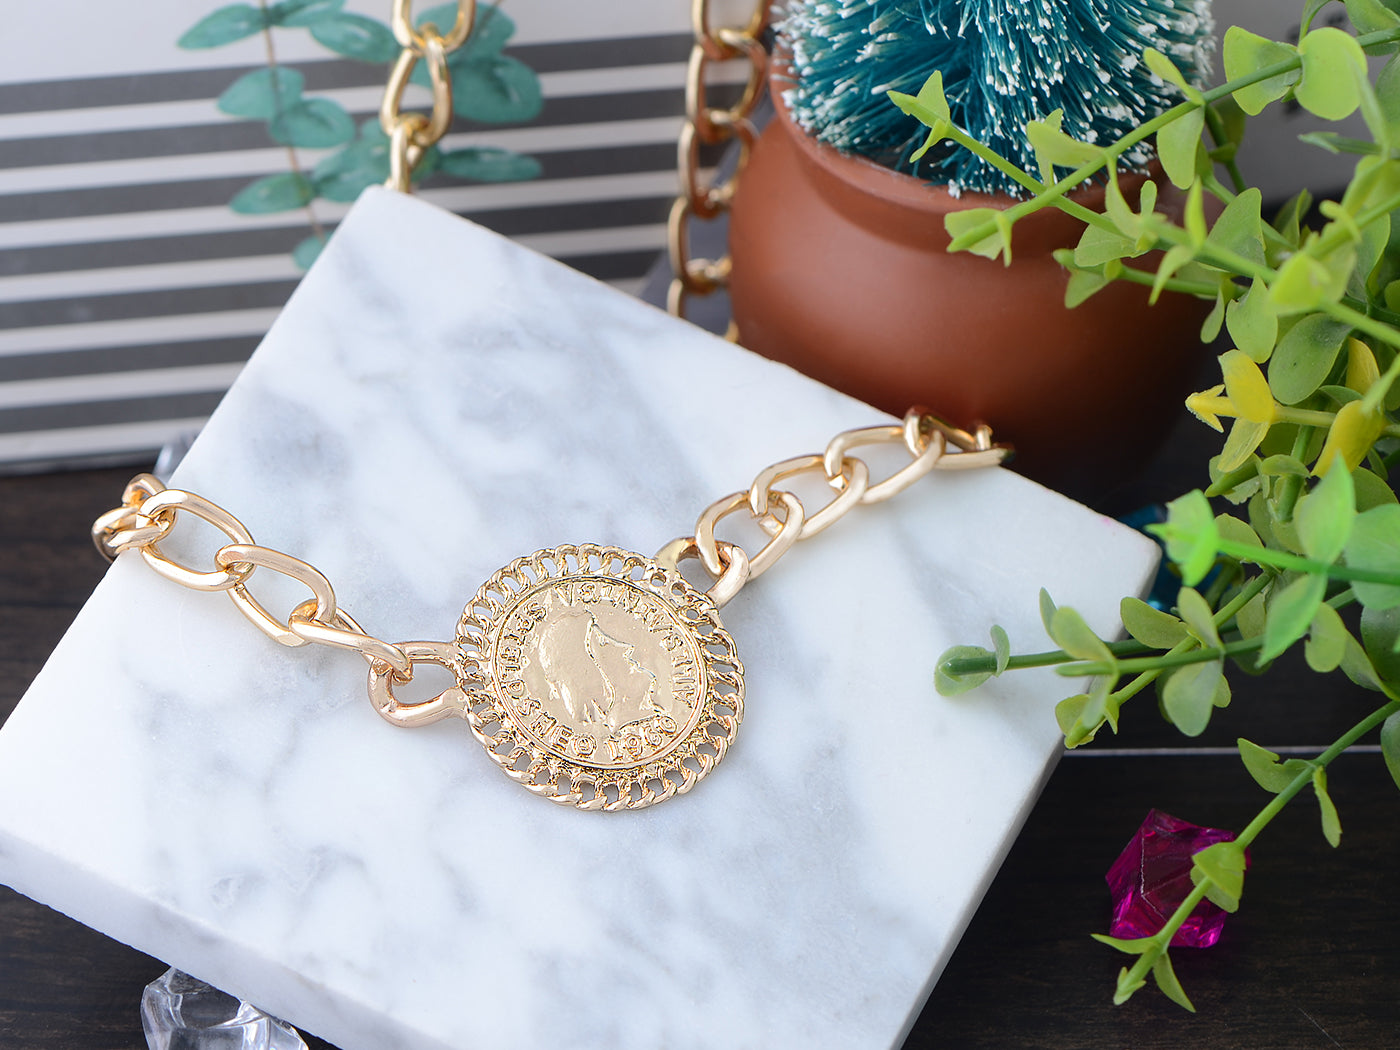 Profile Dollar Coin Bling Chain Link Urban Statement Necklace